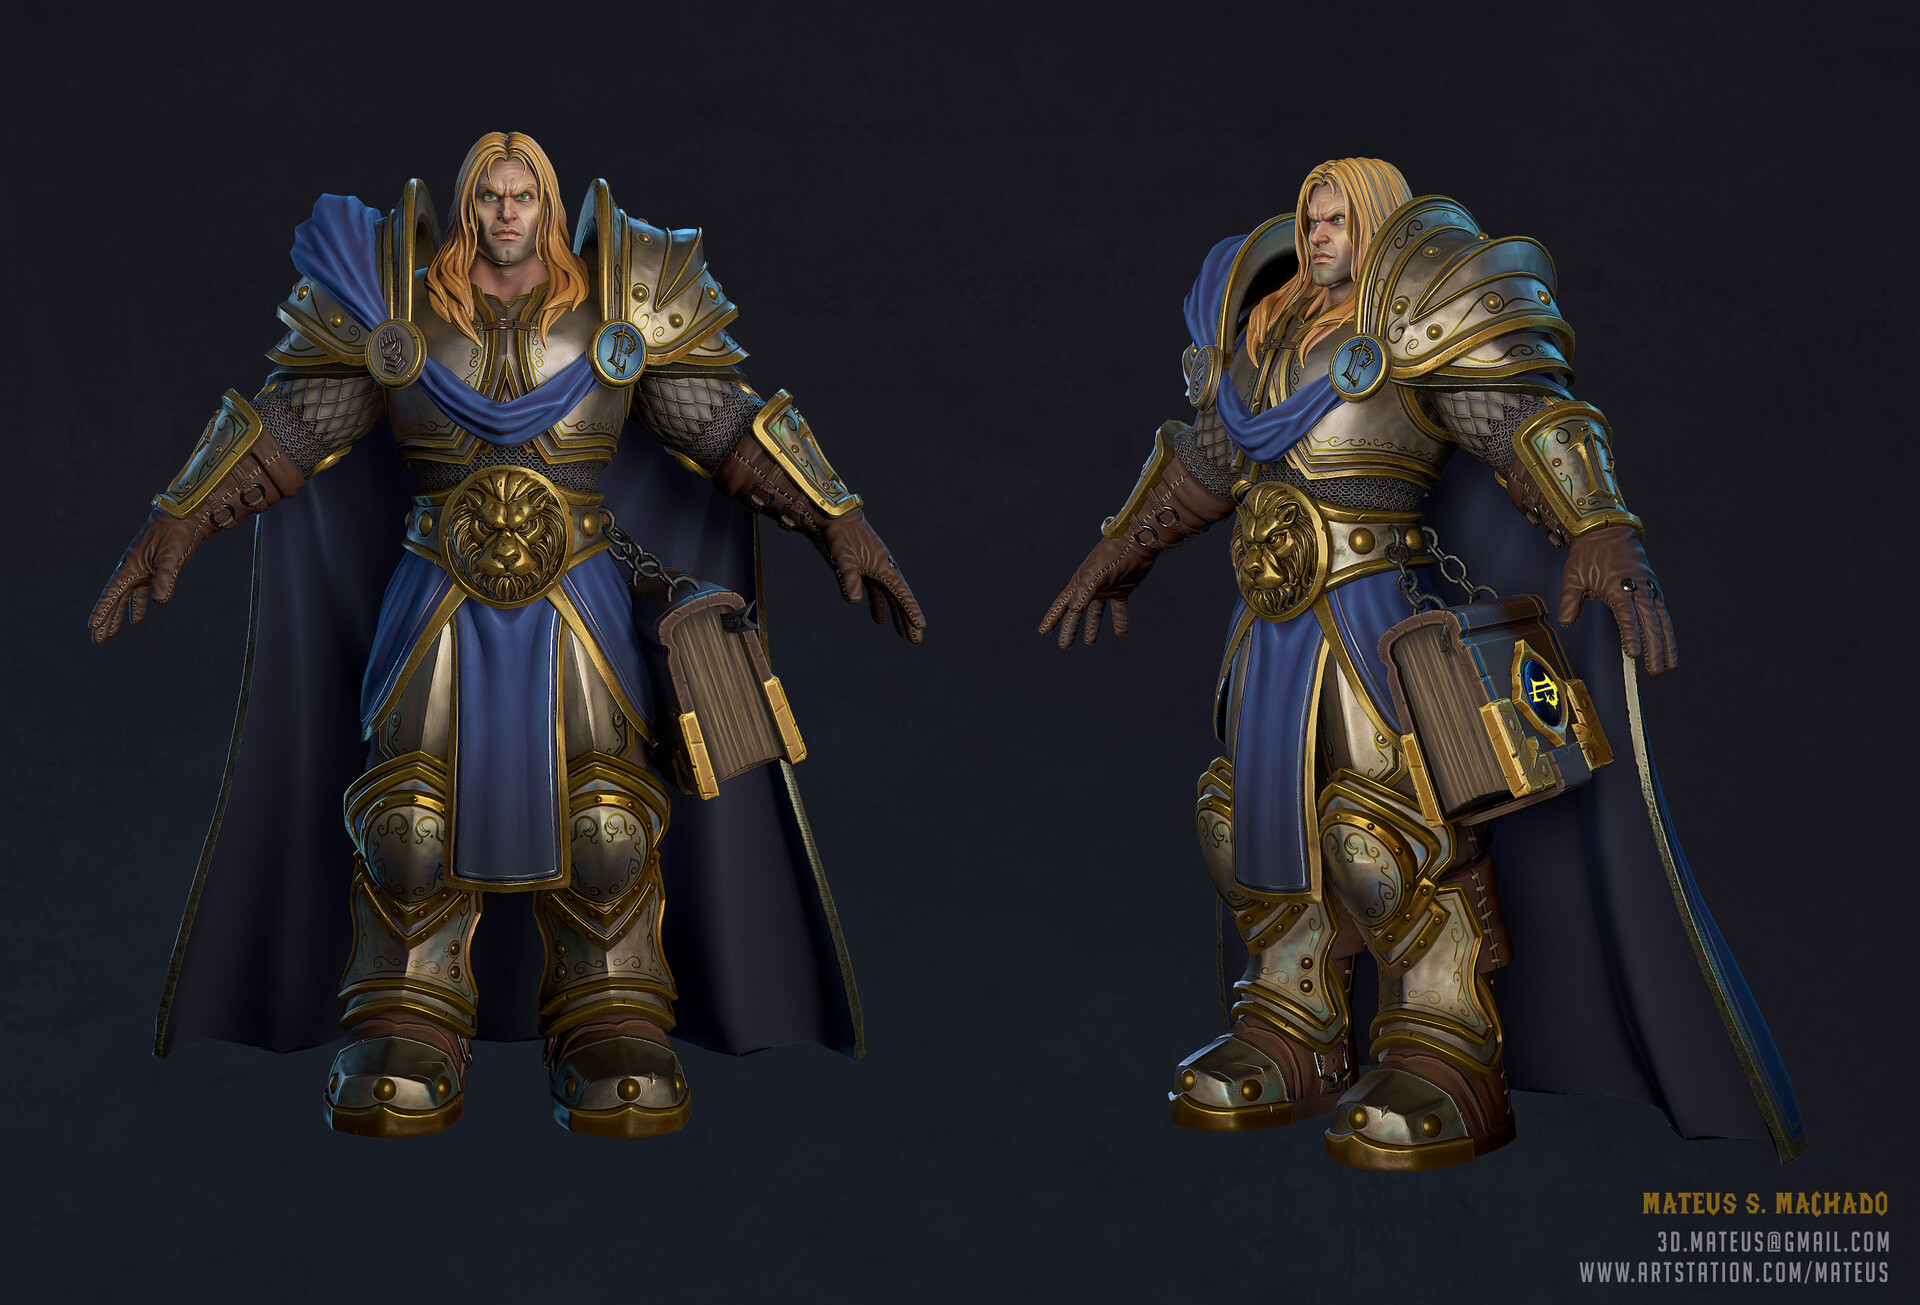 Slægtsforskning bemærkede ikke melodisk This is how canonically Arthas's face look like. Reforged is an  abomination. : r/warcraft3